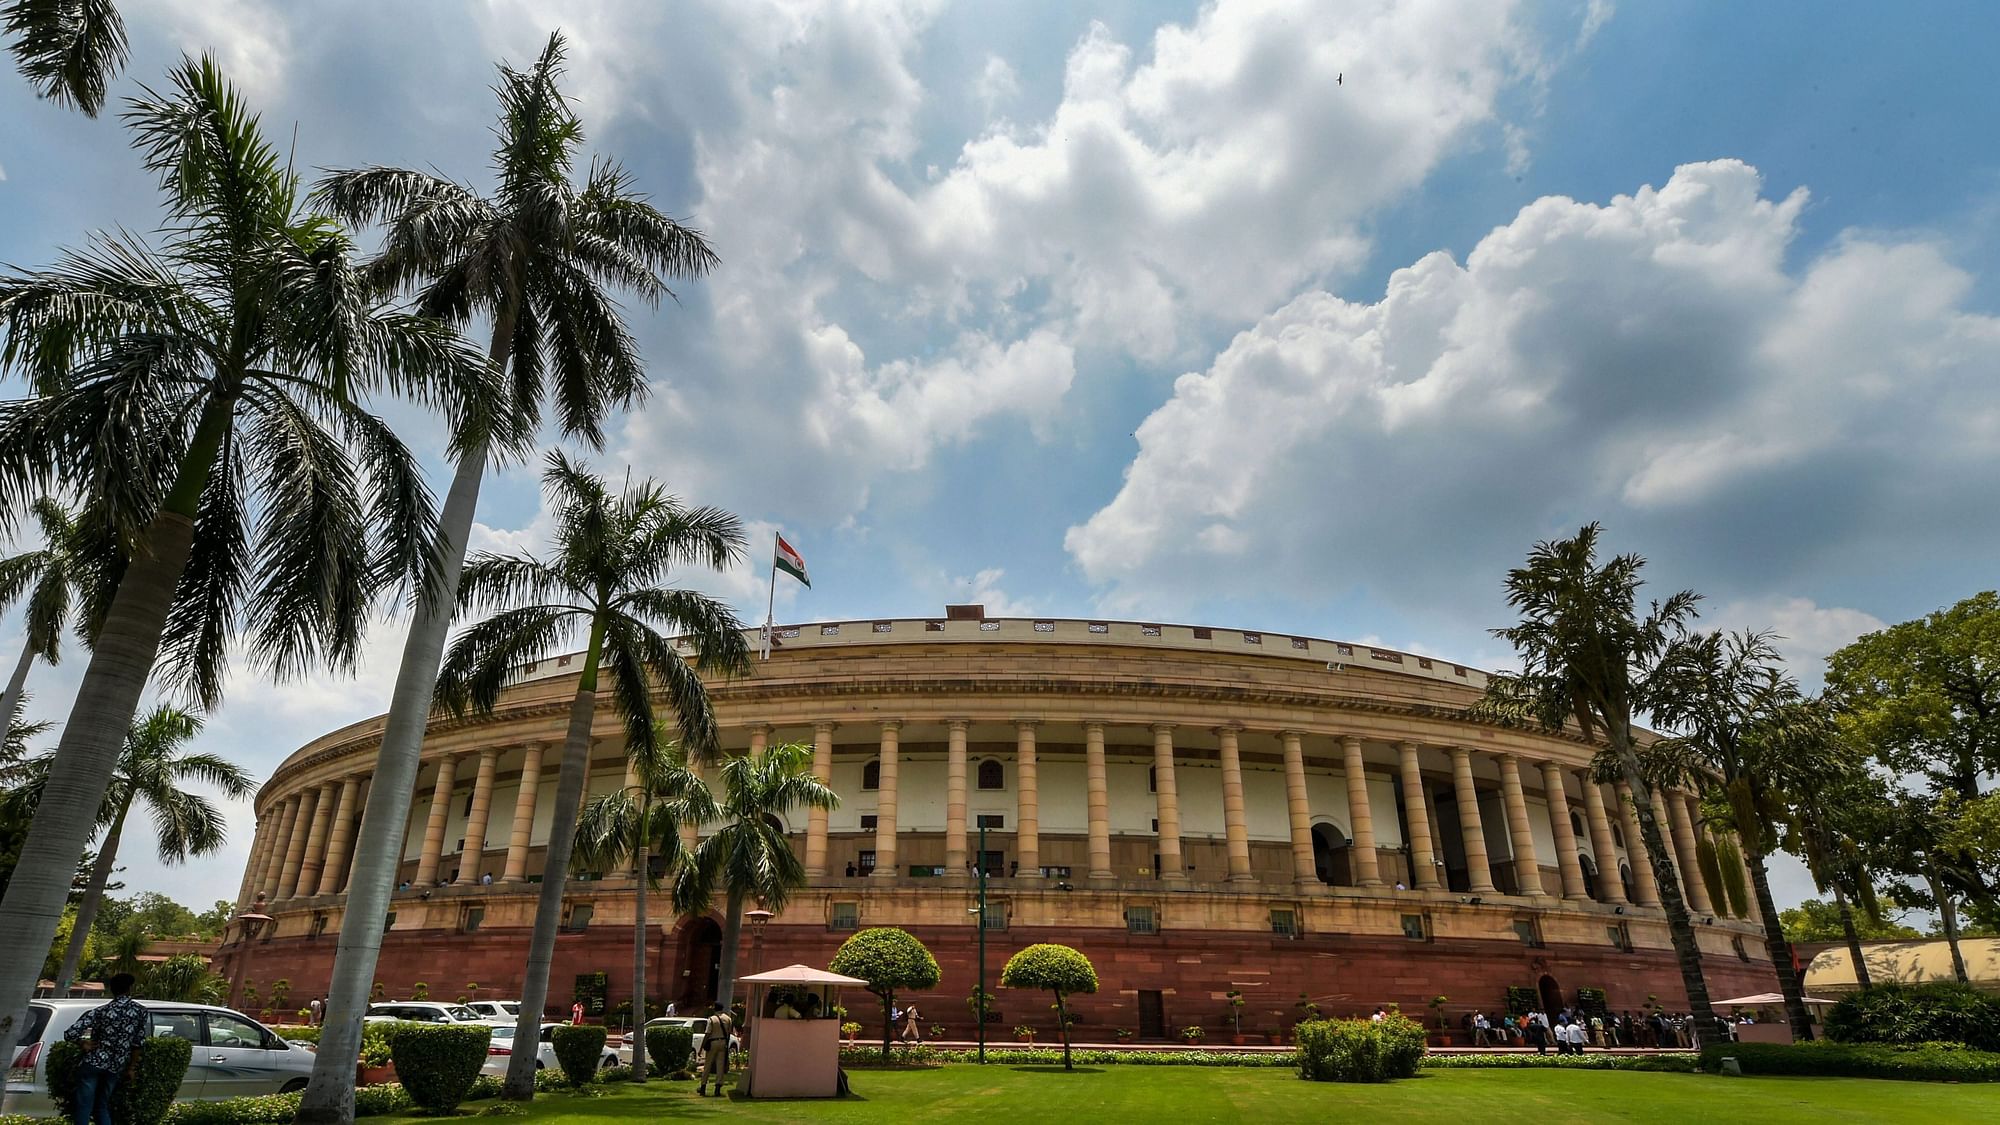 The Indian Parliament.